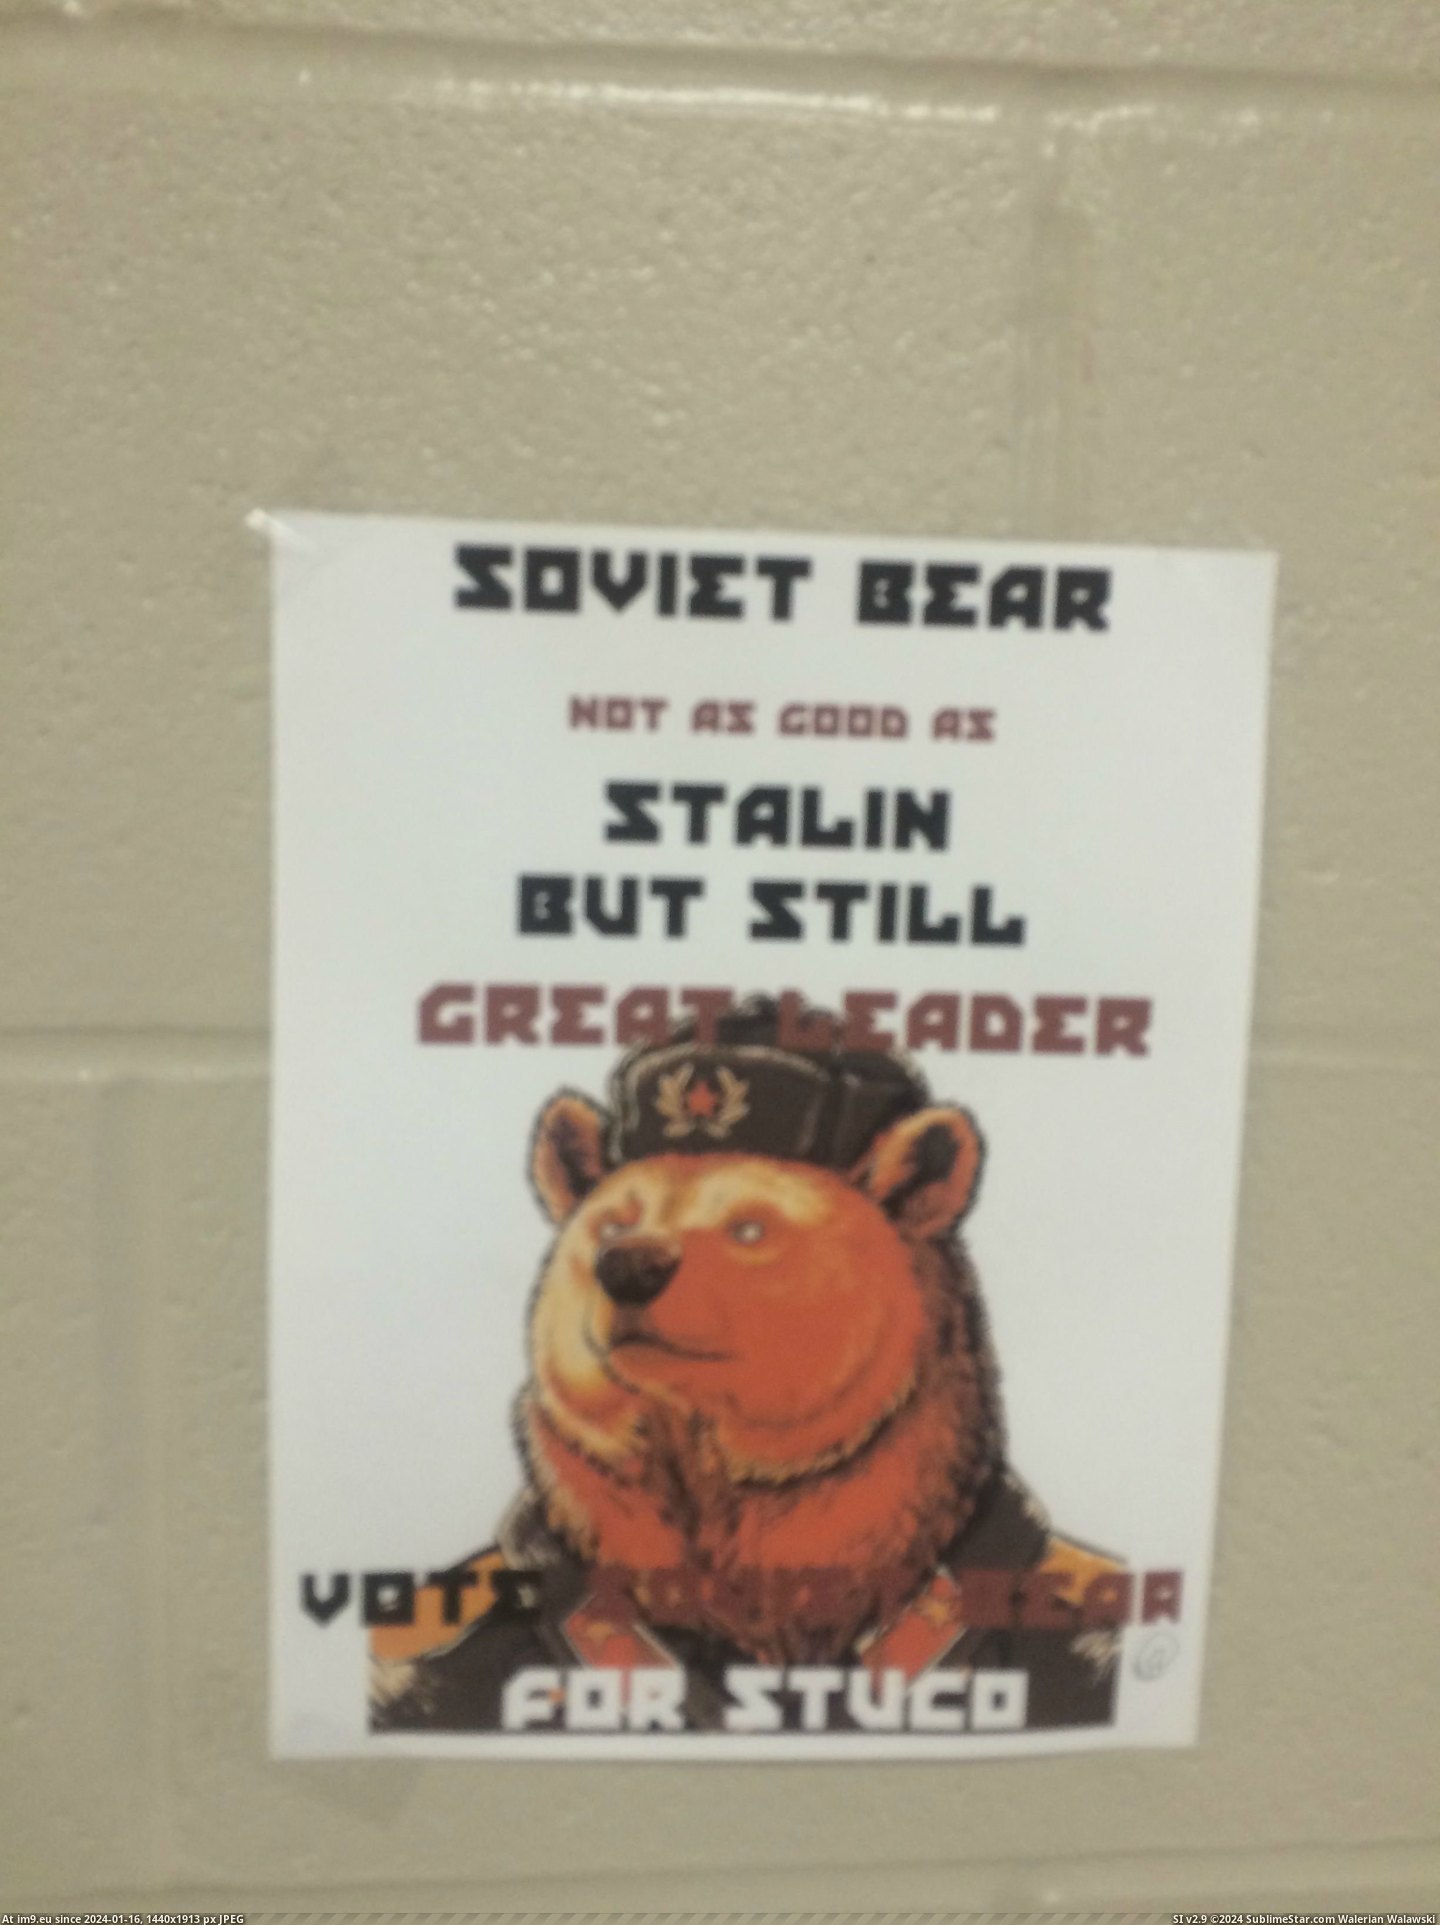 #Funny #School #Decided #Holding #Soviet #Council #Elections #Bear #Student #Run [Funny] So my school is holding elections for student council... and someone has decided to run as Soviet Bear 13 Pic. (Image of album My r/FUNNY favs))